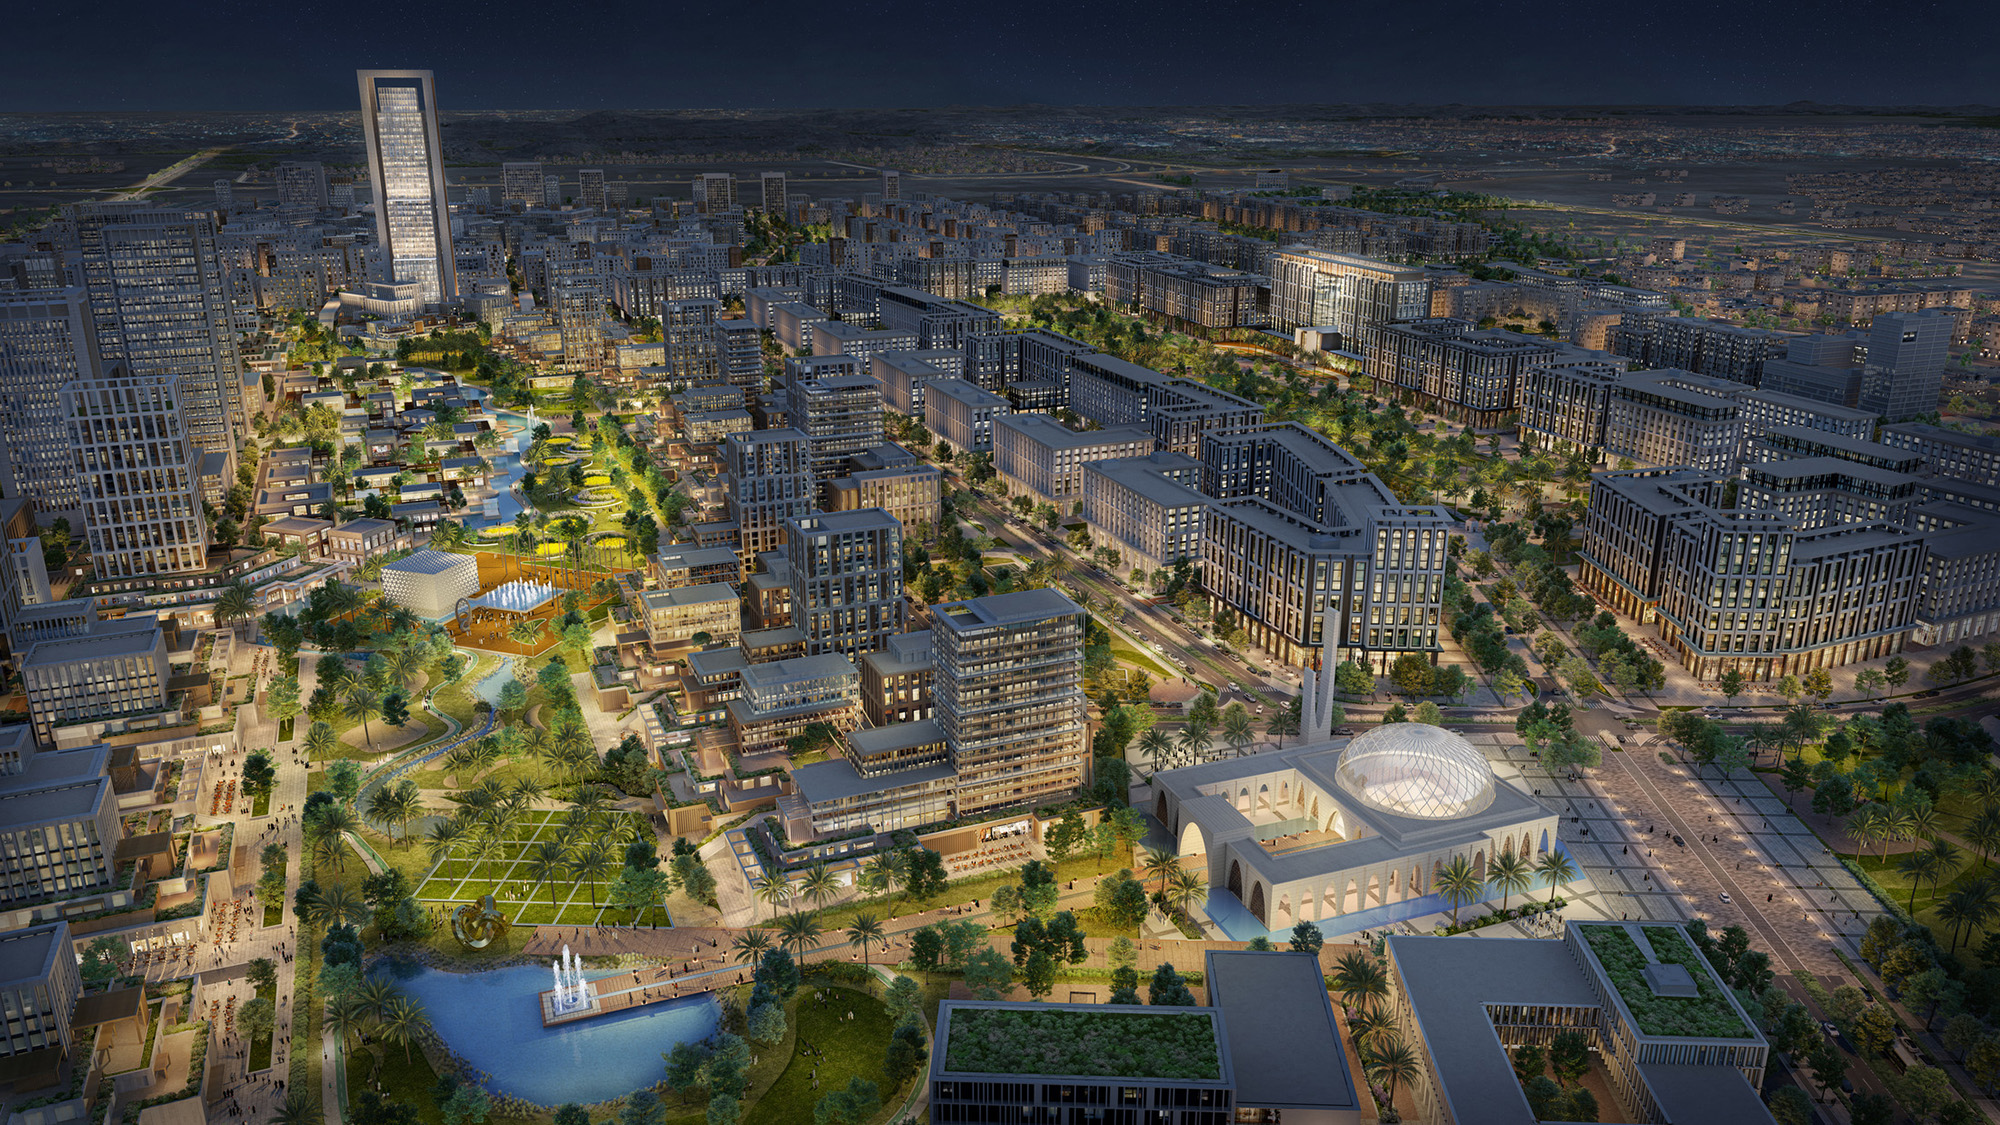 Knowledge Economic City by DLR Group